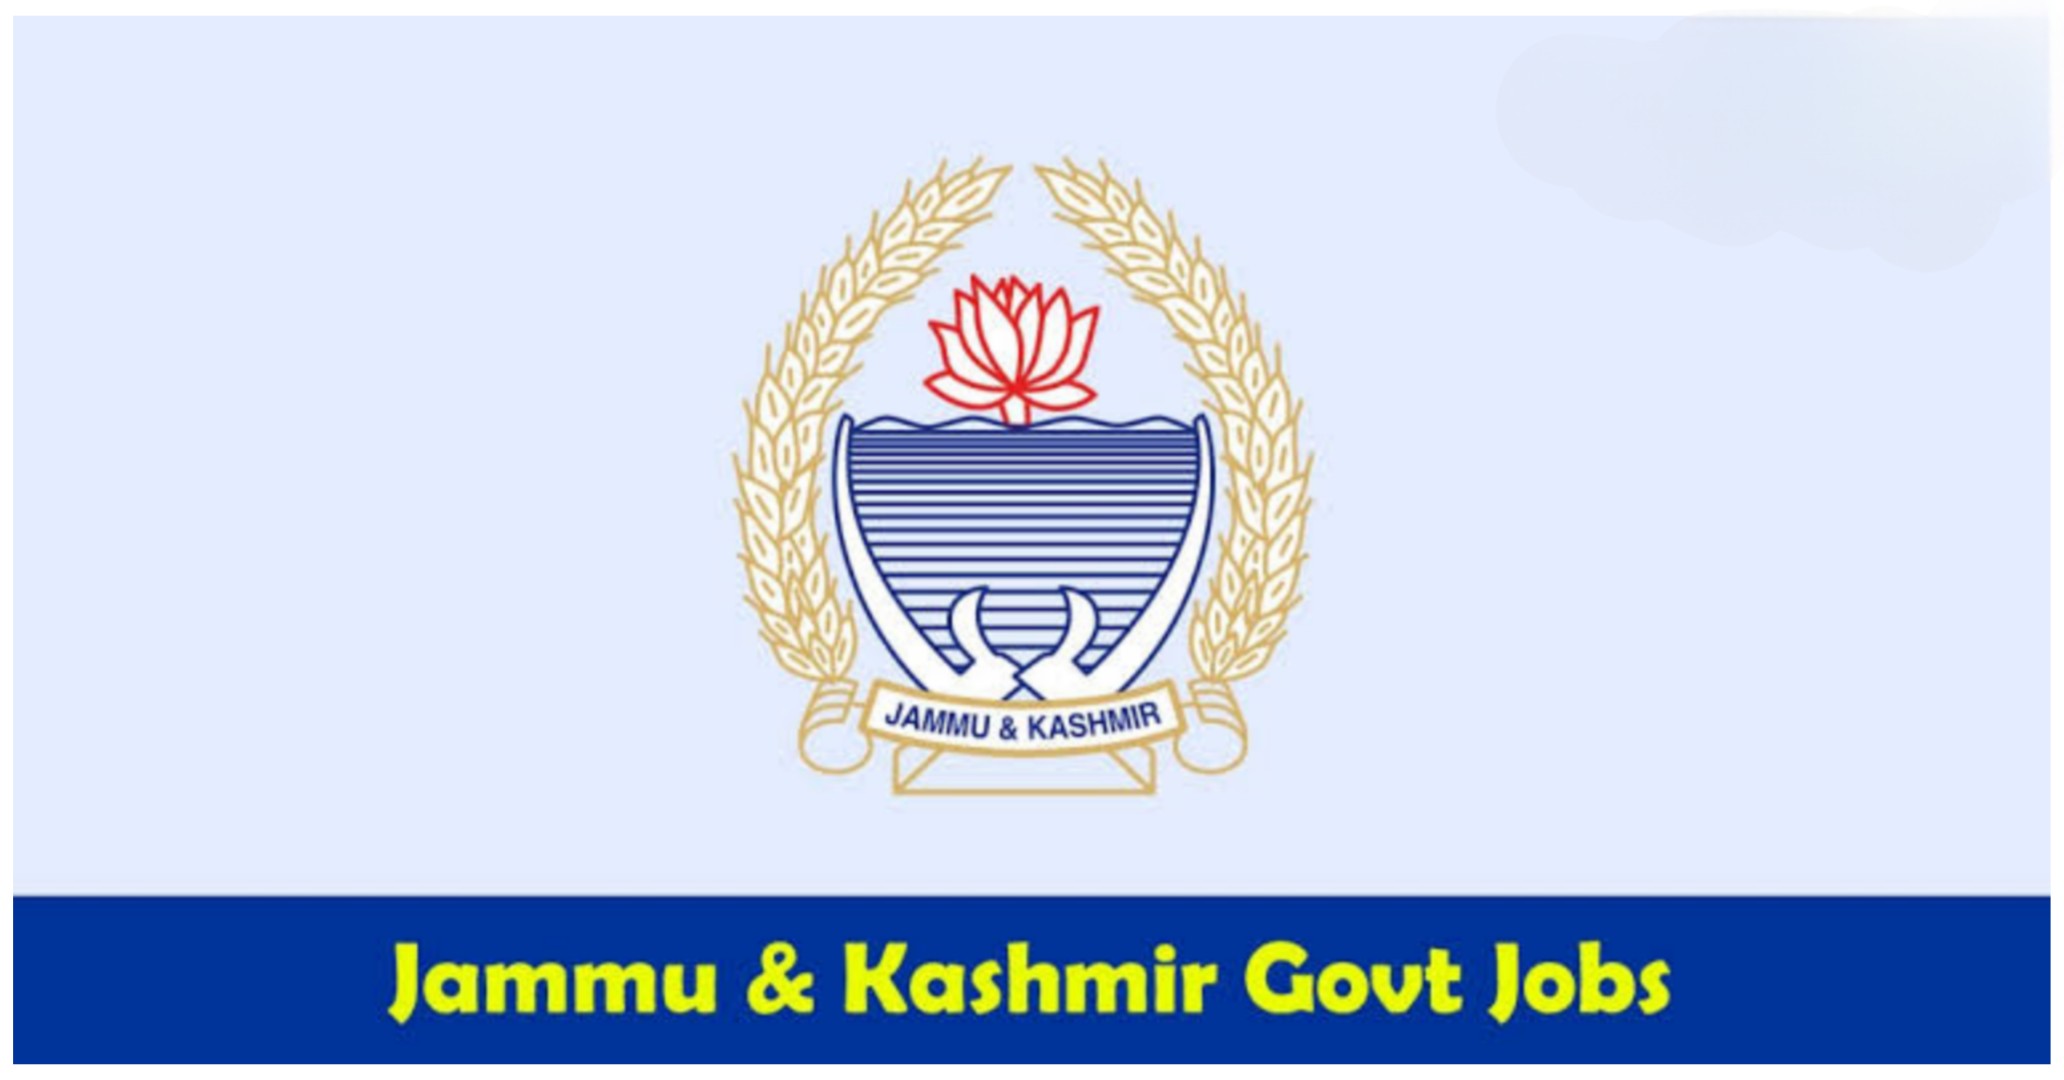 J&K Youth Development Forum Jobs Recruitment 2023 : Check Qualification, Selection Process And How To Apply